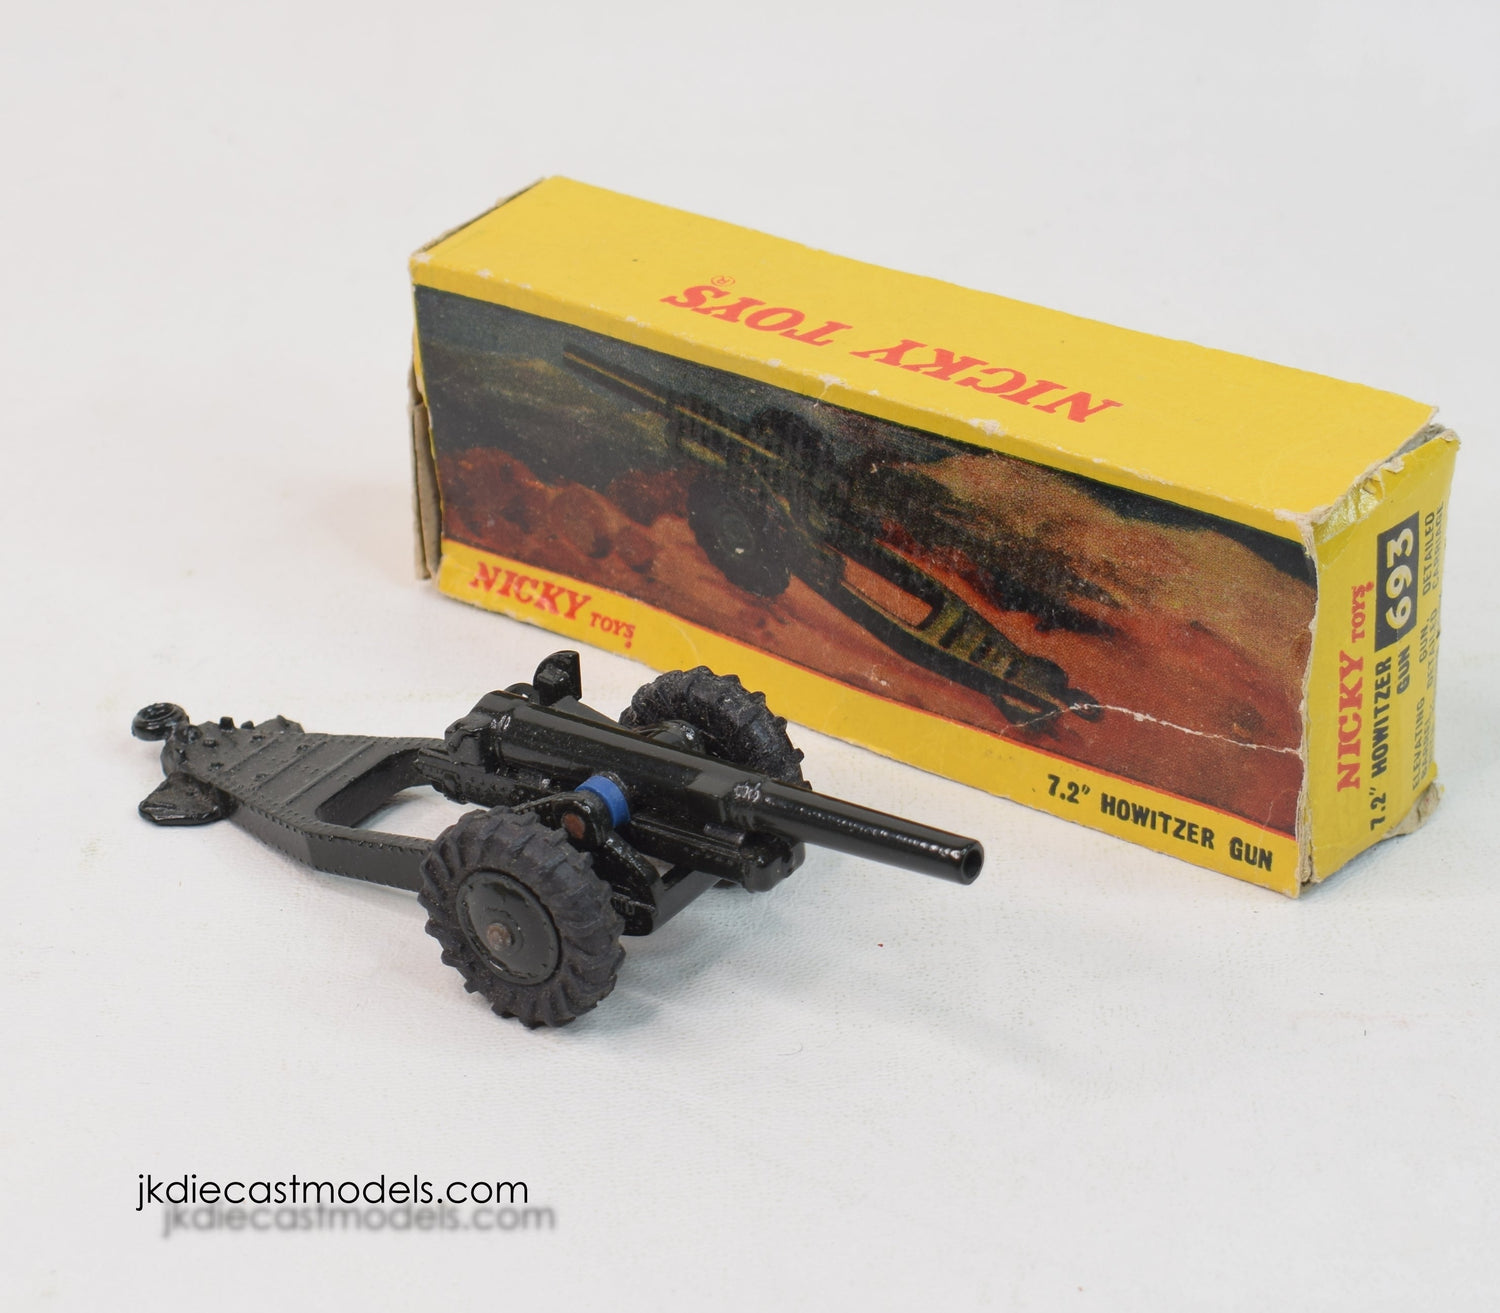 Nicky Toys 693 7.2 Howitzer Gun Very Near Mint/Boxed